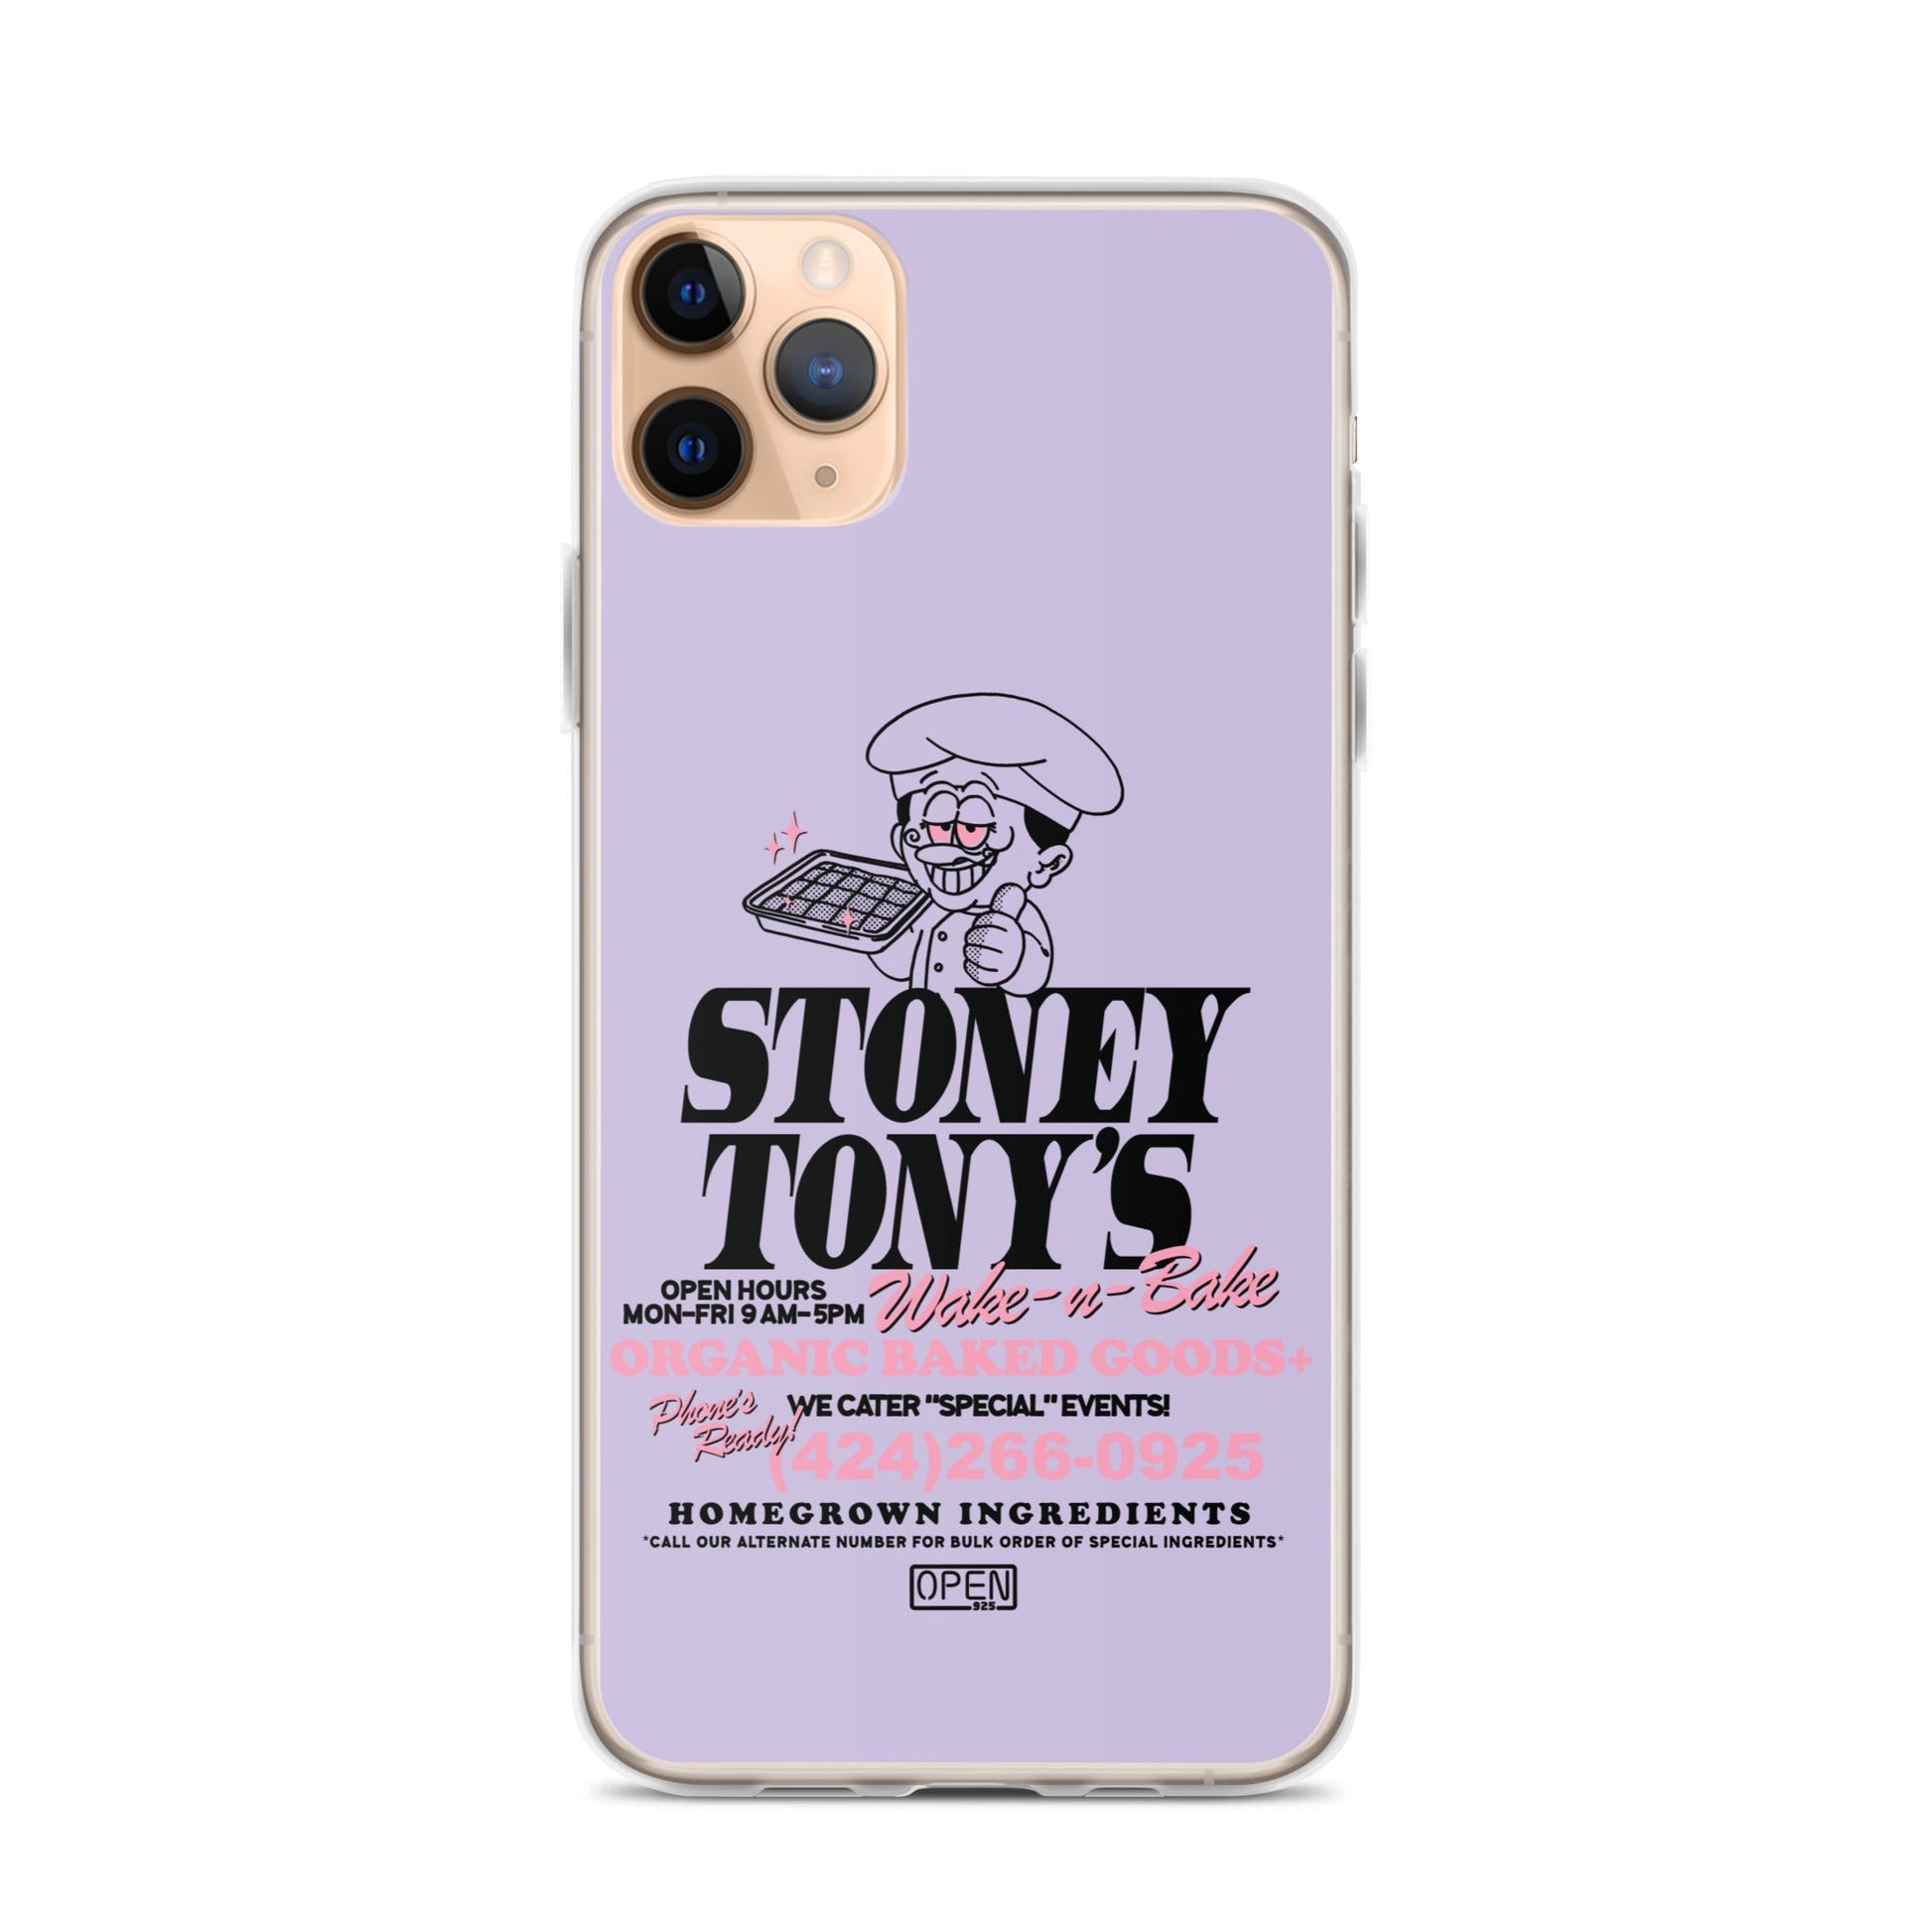 Stoney Toneys Purps Case for iPhone®-Open 925